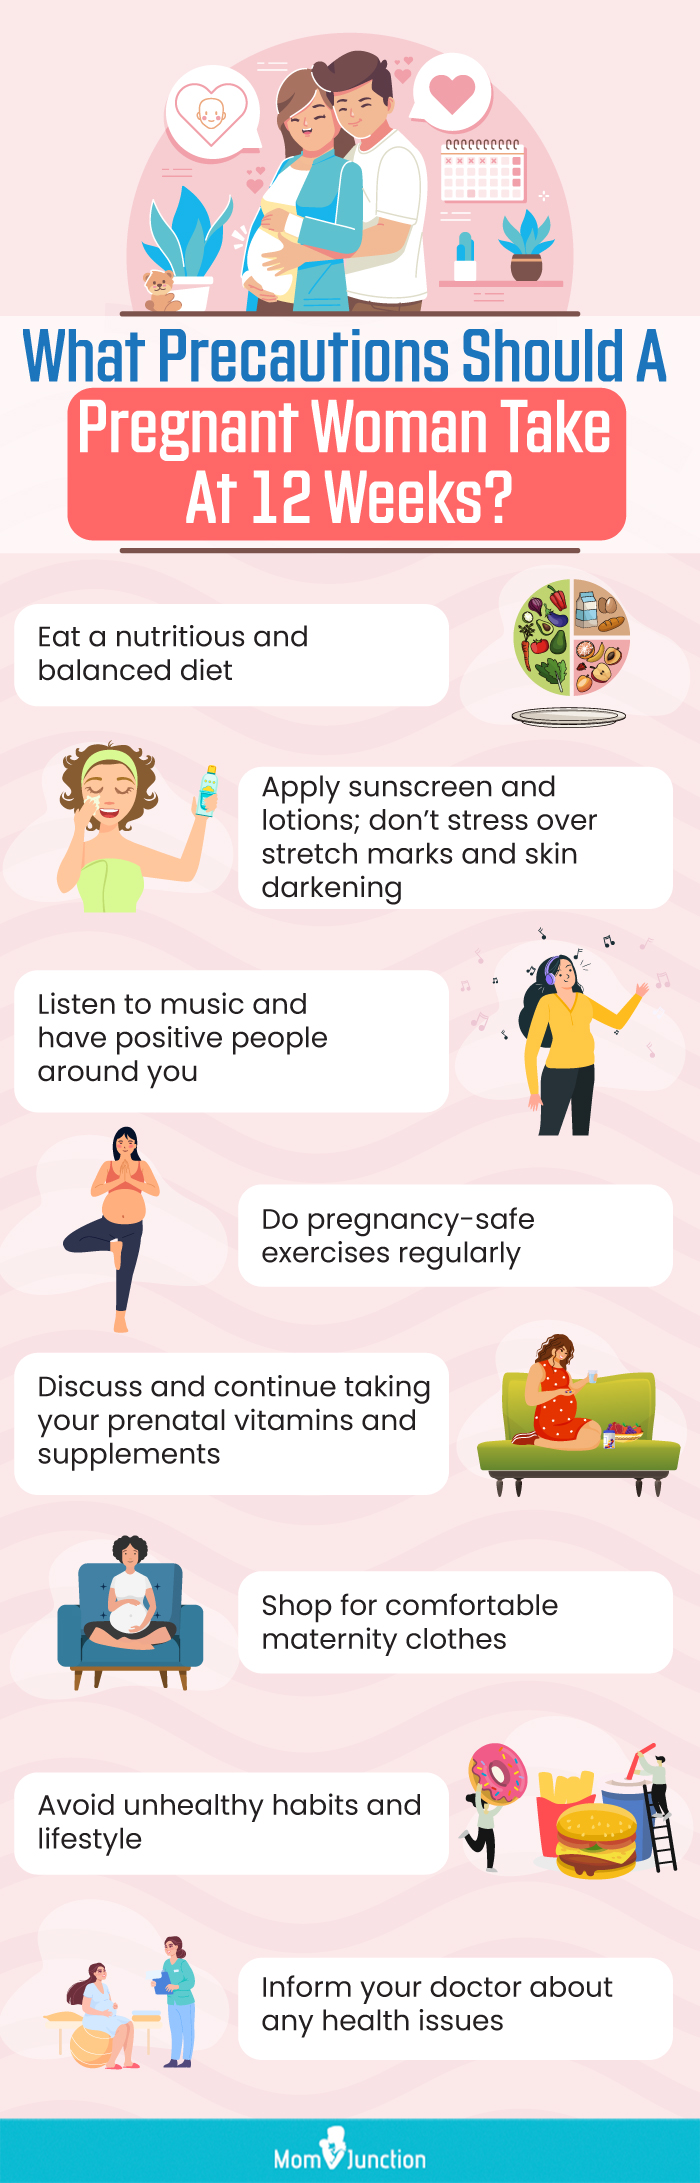 Am I Pregnant? 12 Pregnancy Signs and Symptoms to Look For